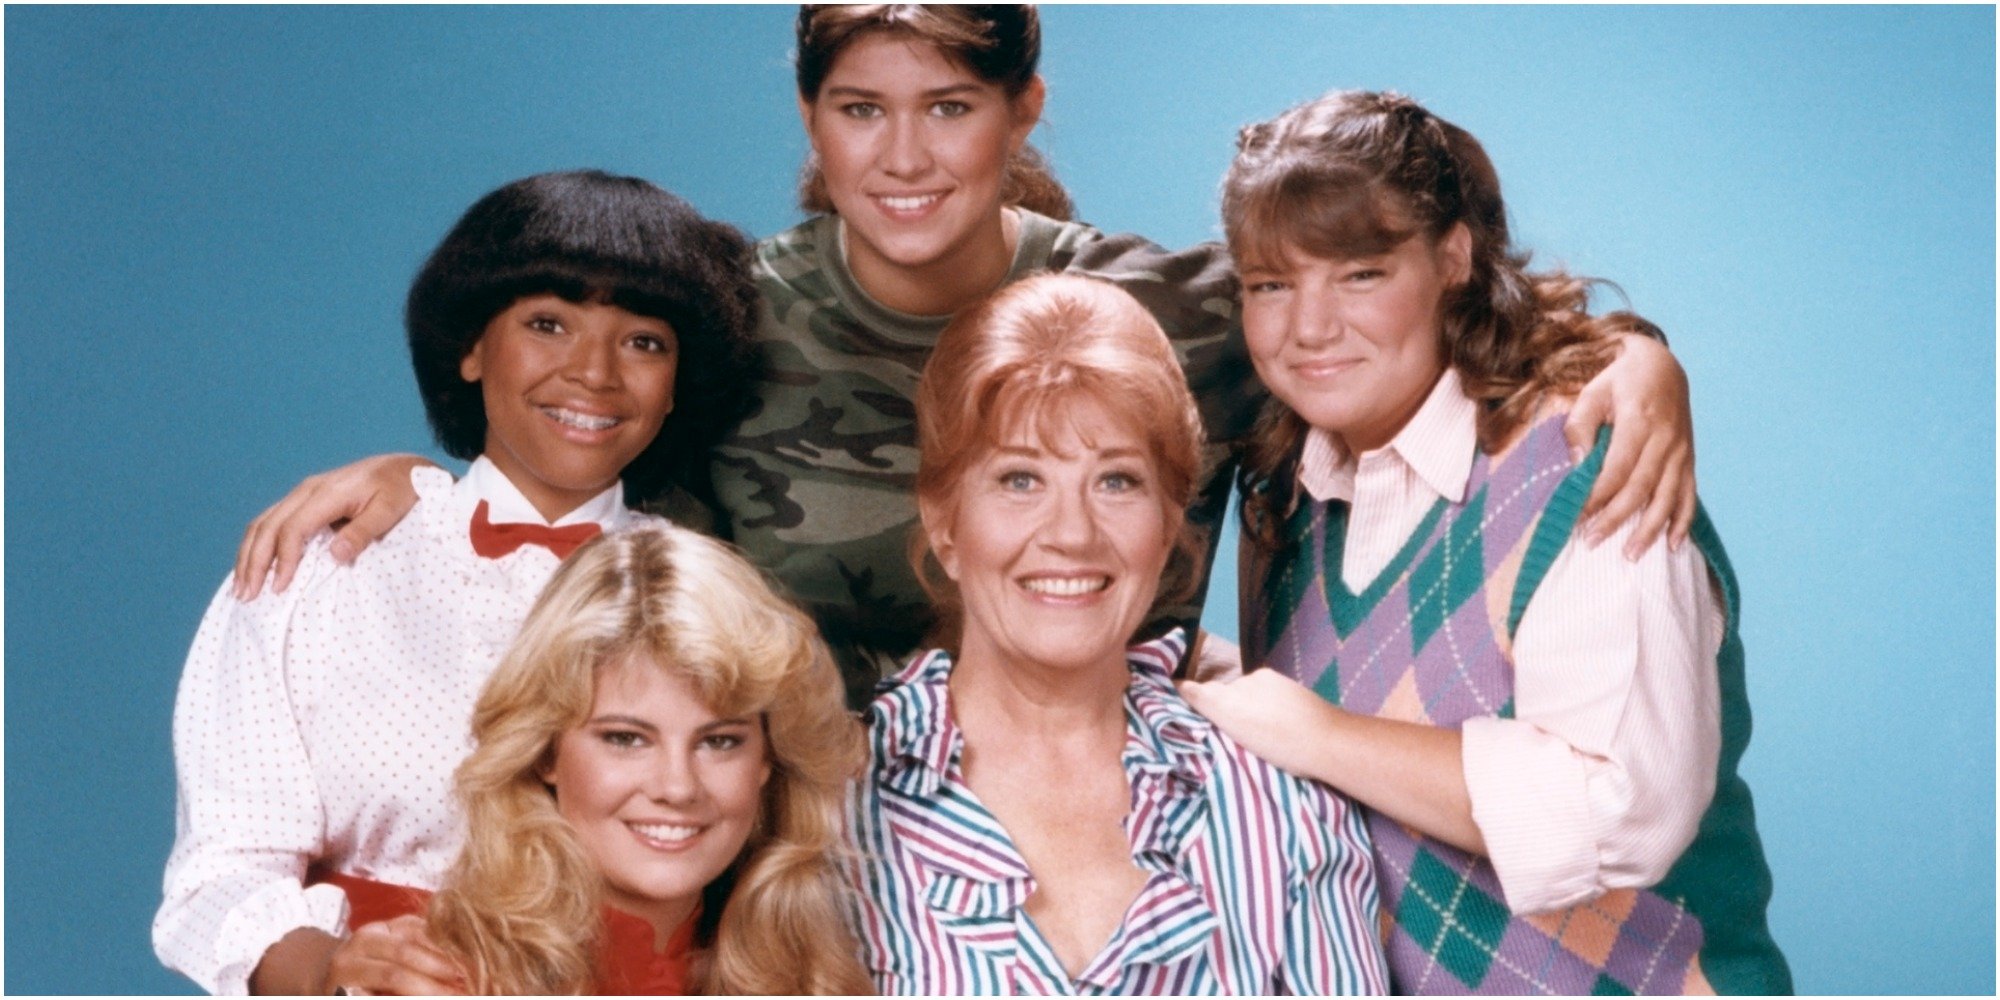 The cast of the Facts of Life.